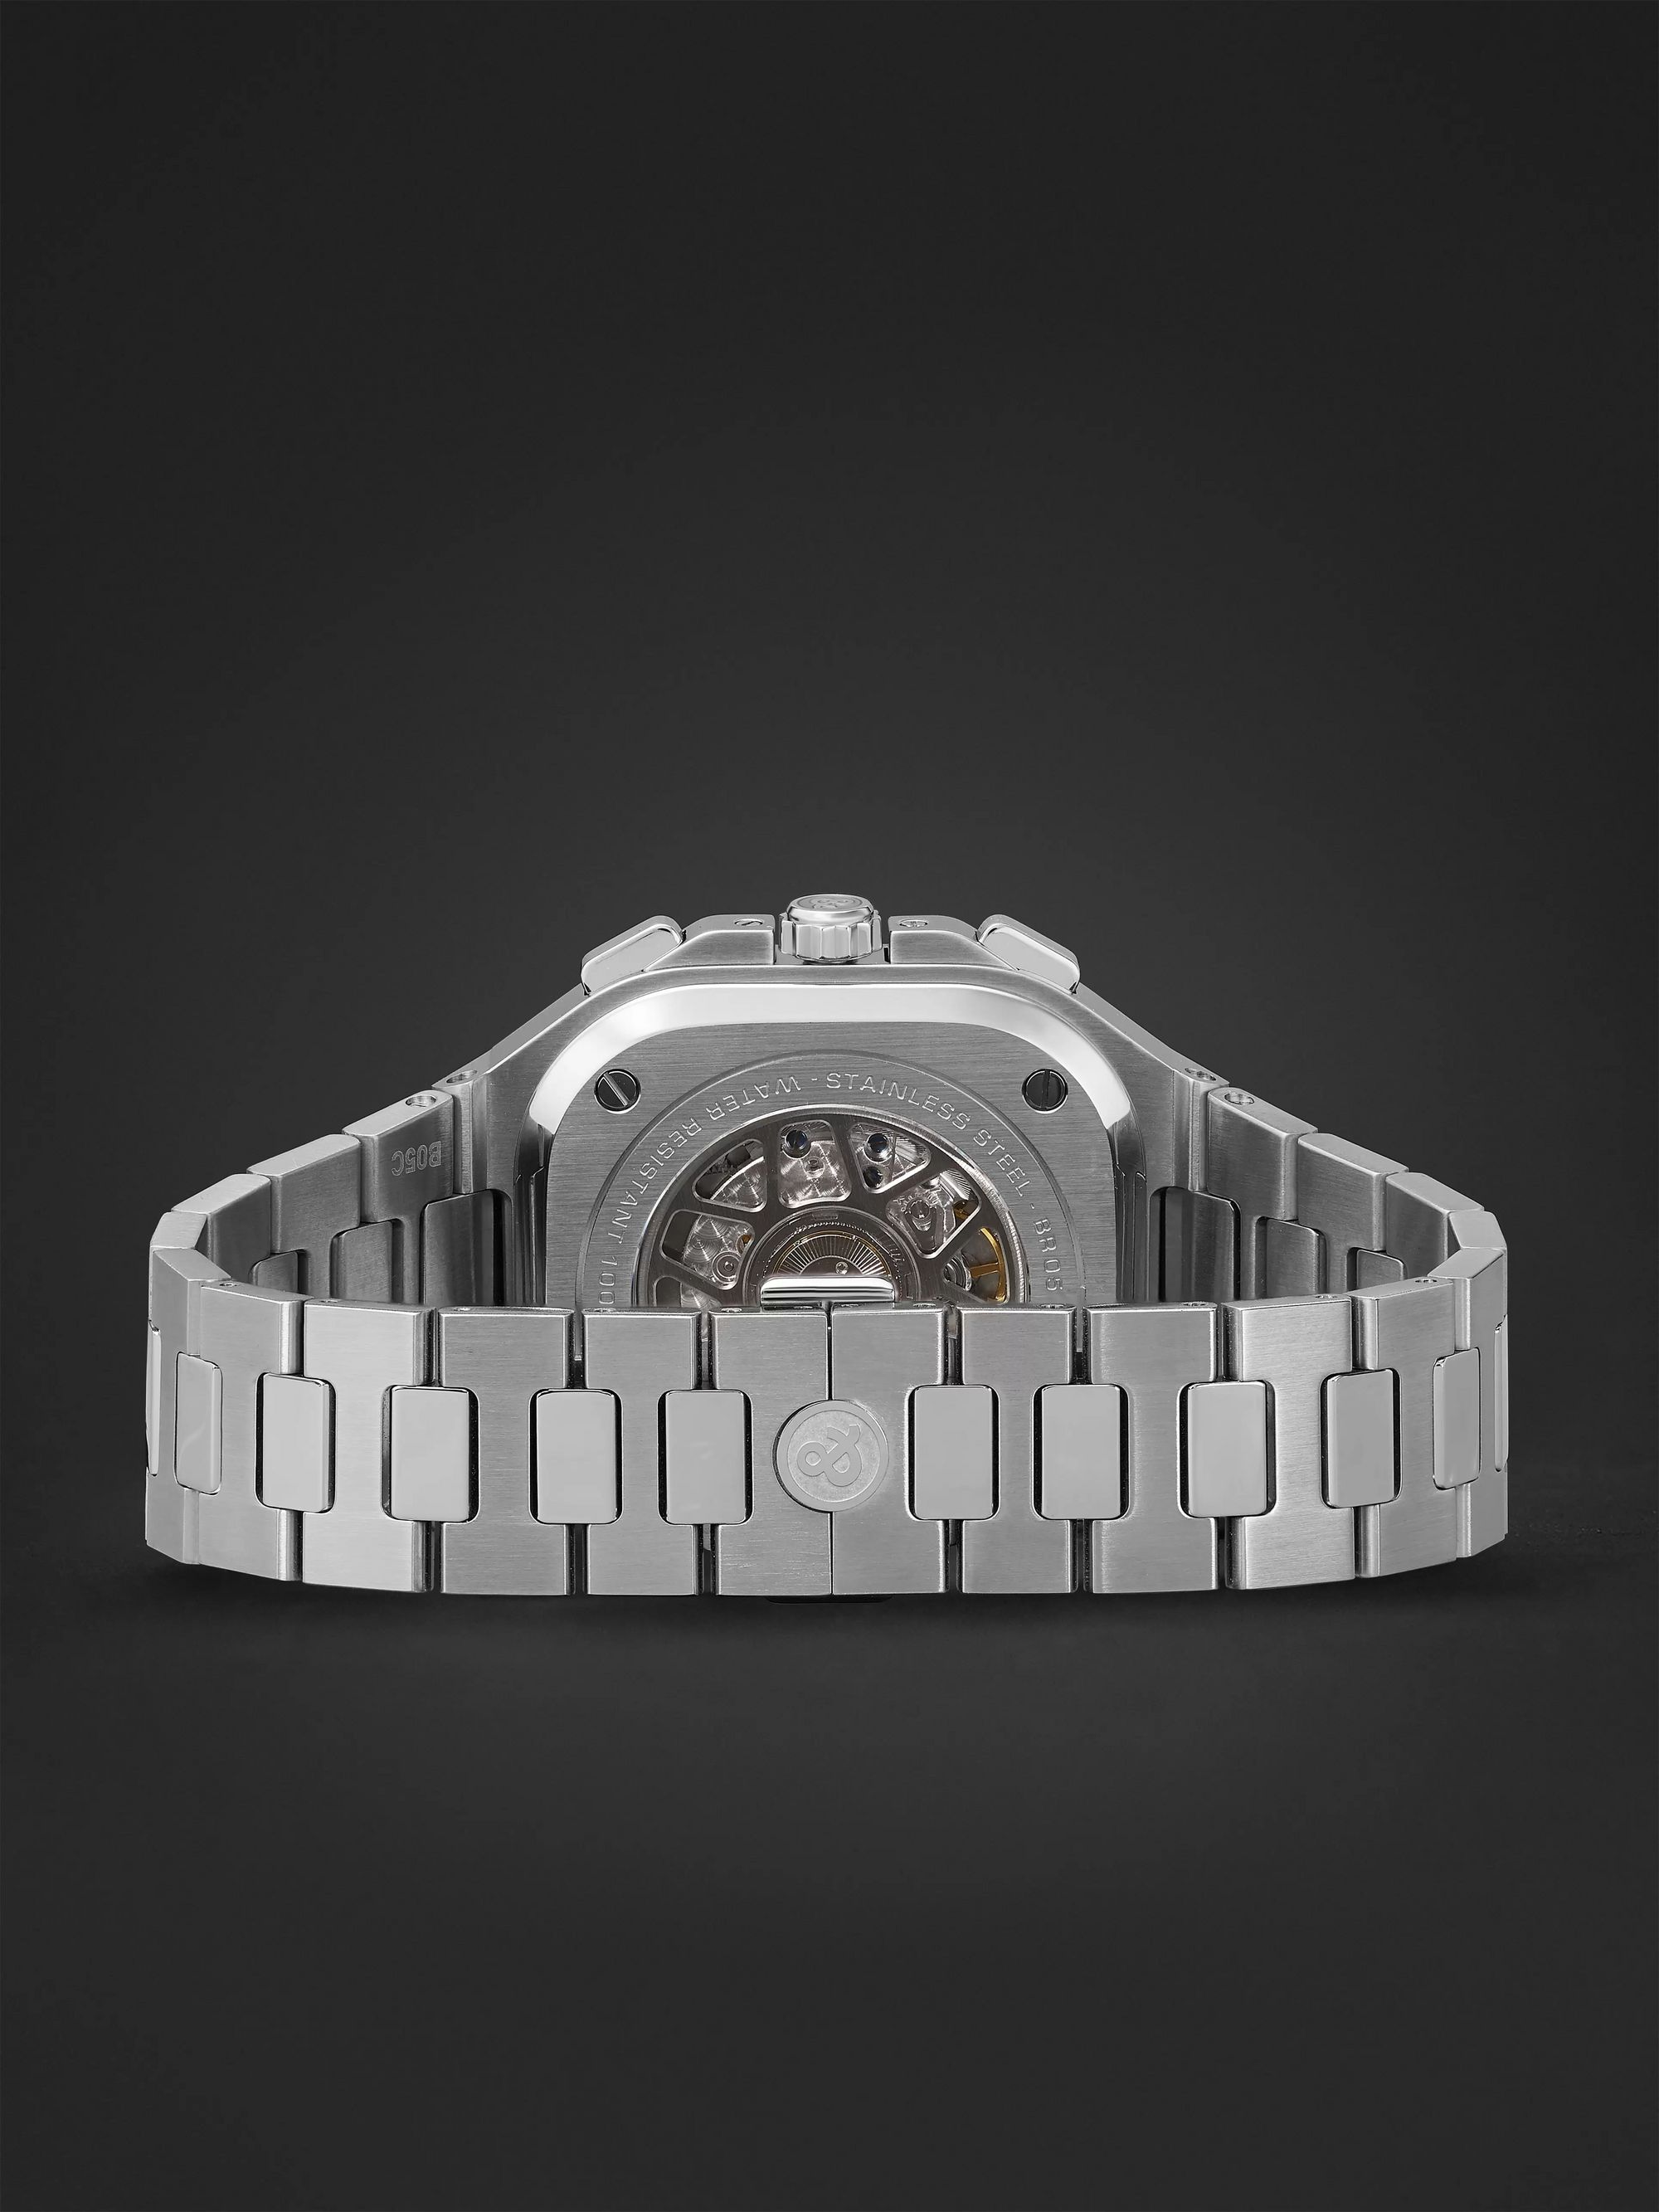 BELL & ROSS BR 05 Automatic Chronograph 42mm Stainless Steel Watch, Ref. No. BR05C-BL-ST/SST